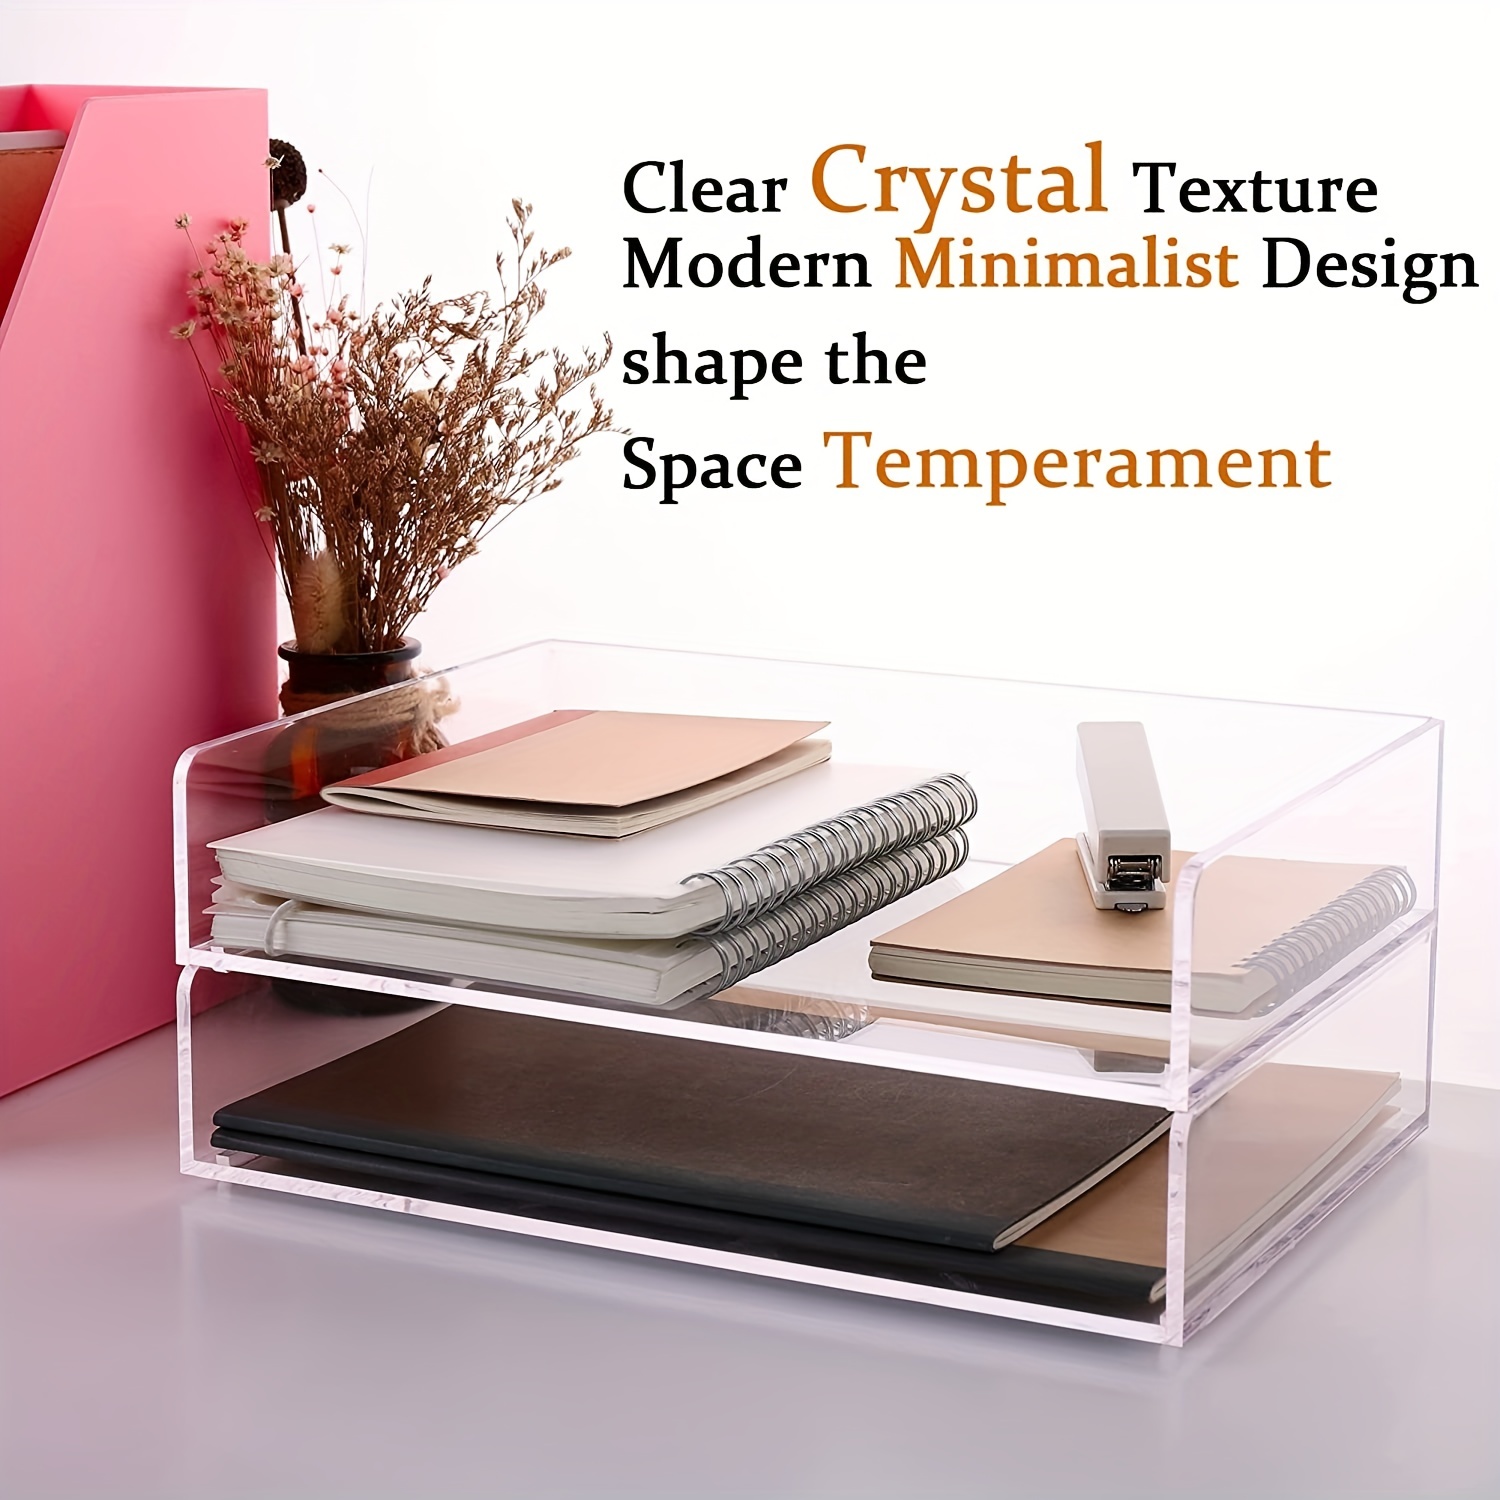 Scrapbook.com - Modern 12x12 Stackable Paper Trays - Clear - 8 Pack